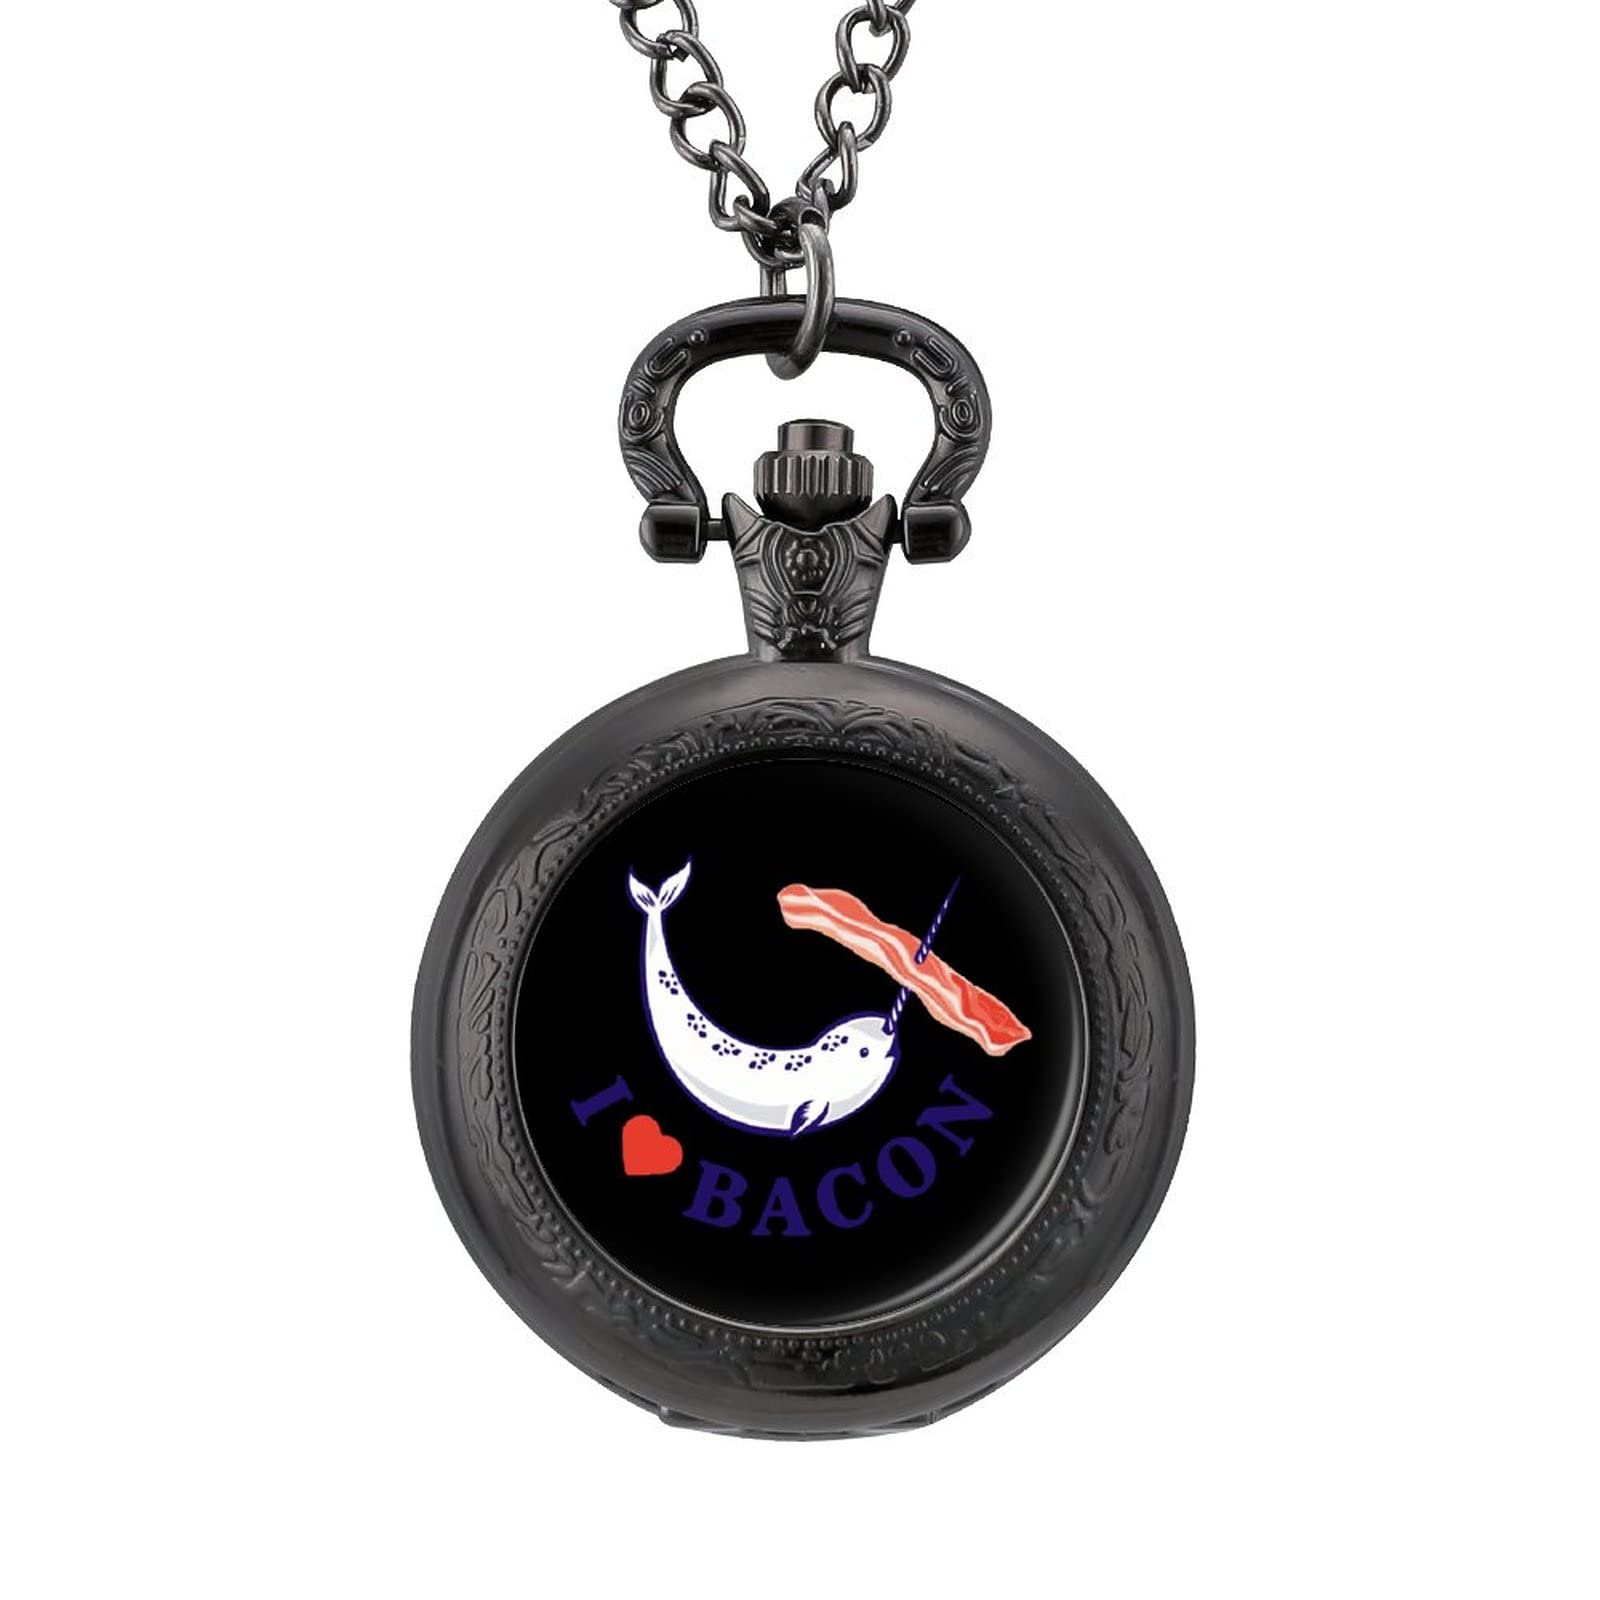 Narwhale I Love Bacon Personalized Pocket Watch Vintage Numerals Scale Quartz Watches Pendant Necklace with Chain